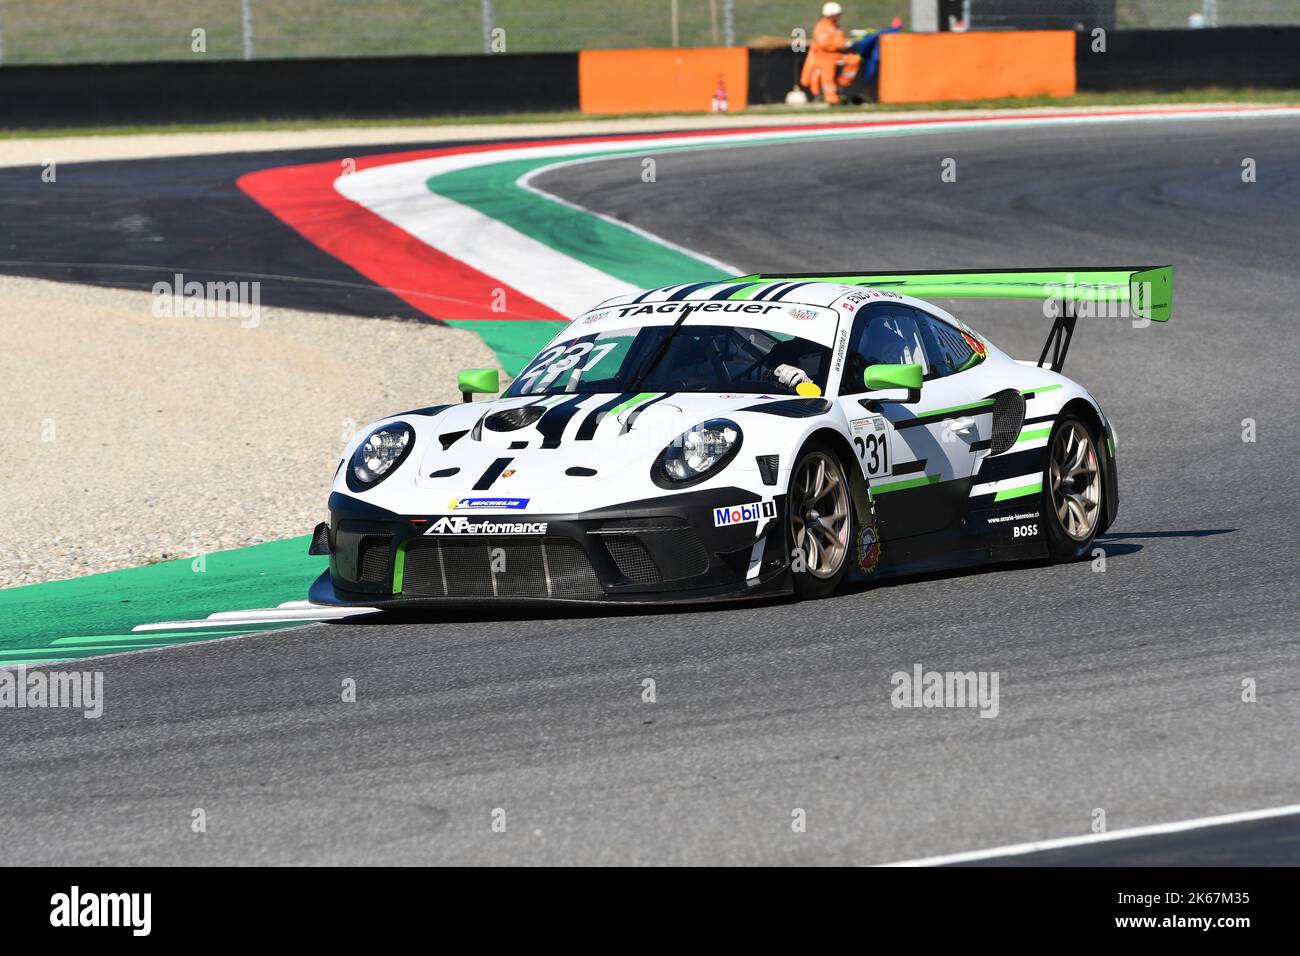 Mugello Circuit, Italy - 23 September 2022: Porsche 911 GT3 R in action at Mugello Circuit during Porsche Sports Cup Suisse event 2022 driven by unkno Stock Photo